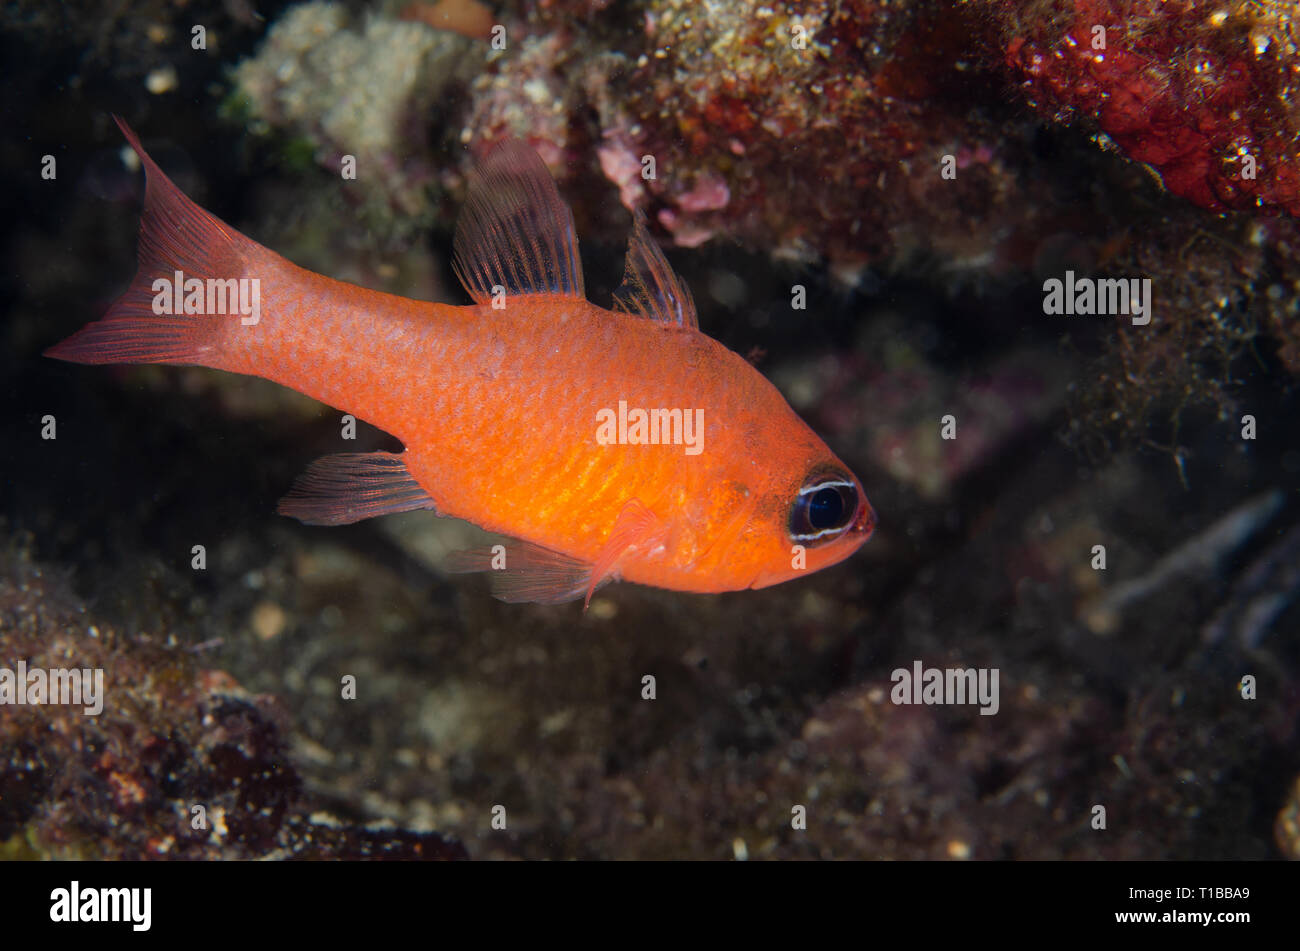 Cardinal Fish, or King of the Mullets, Apogon imberbis, Apogonidae, Tor Paterno Marine Protected Area, Rome, Italy, Mediterranean Sea Stock Photo